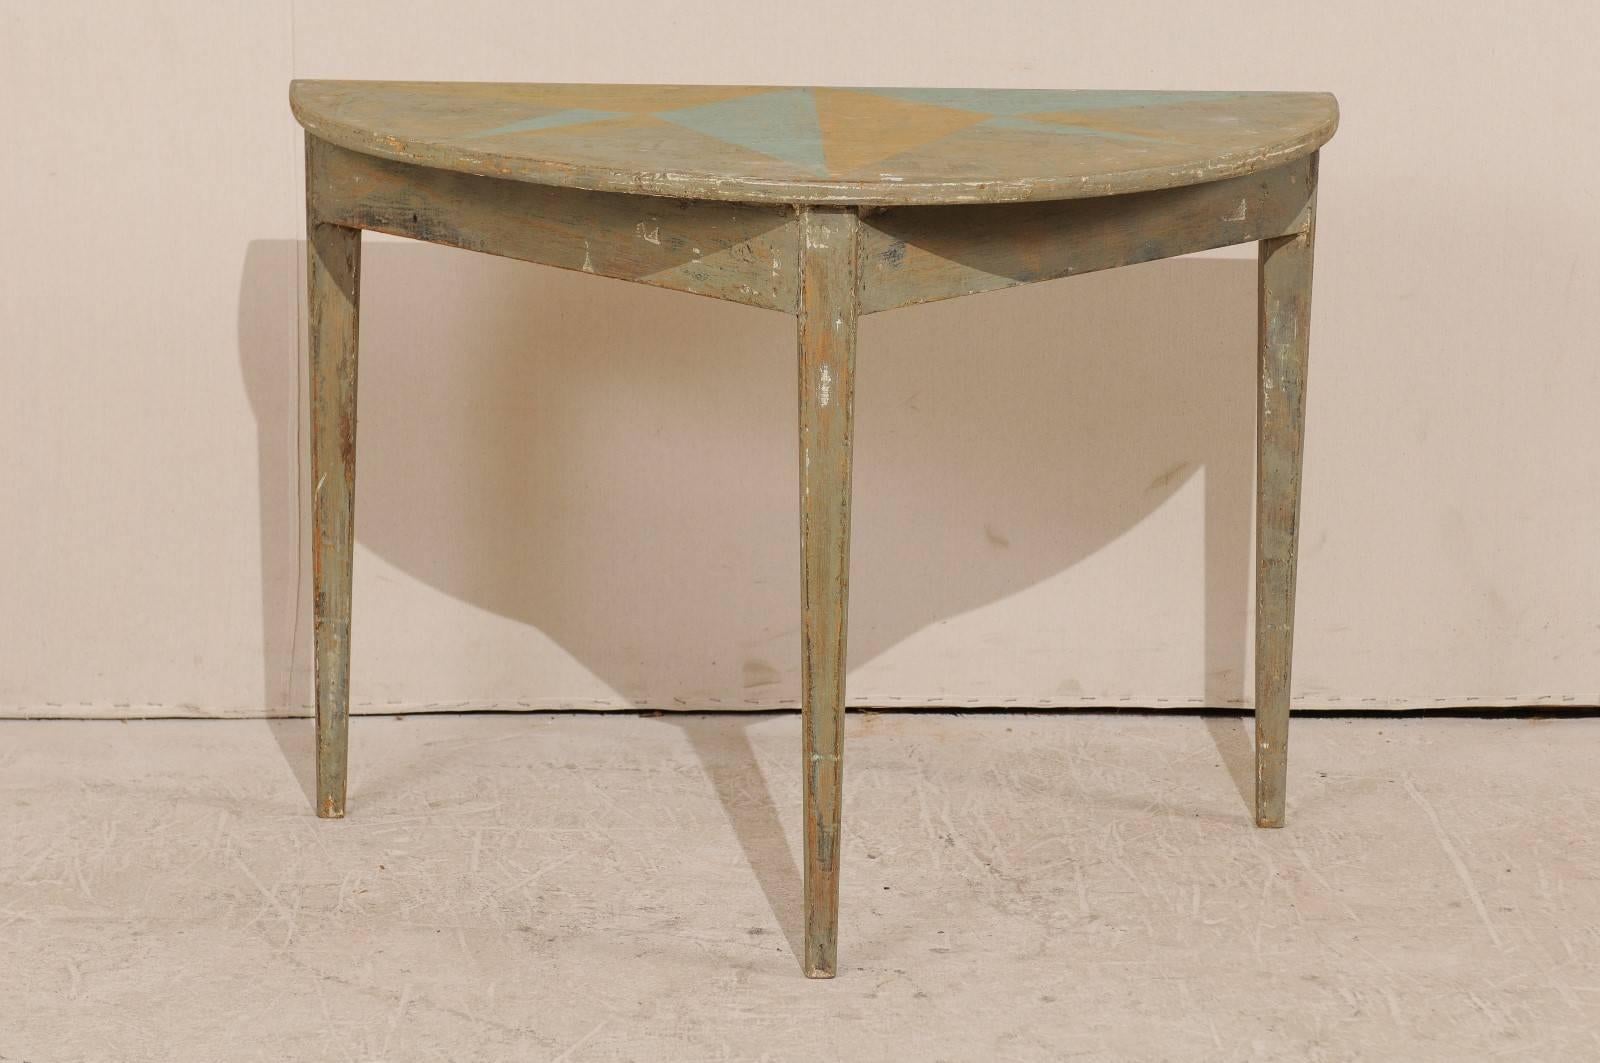 A 19th century Swedish painted wood demi lune table. This Swedish demi lune table features a semi-circular top over a triangular shaped apron. The top has a custom painted half-star design in a turquoise and cantaloupe and the overall table has a